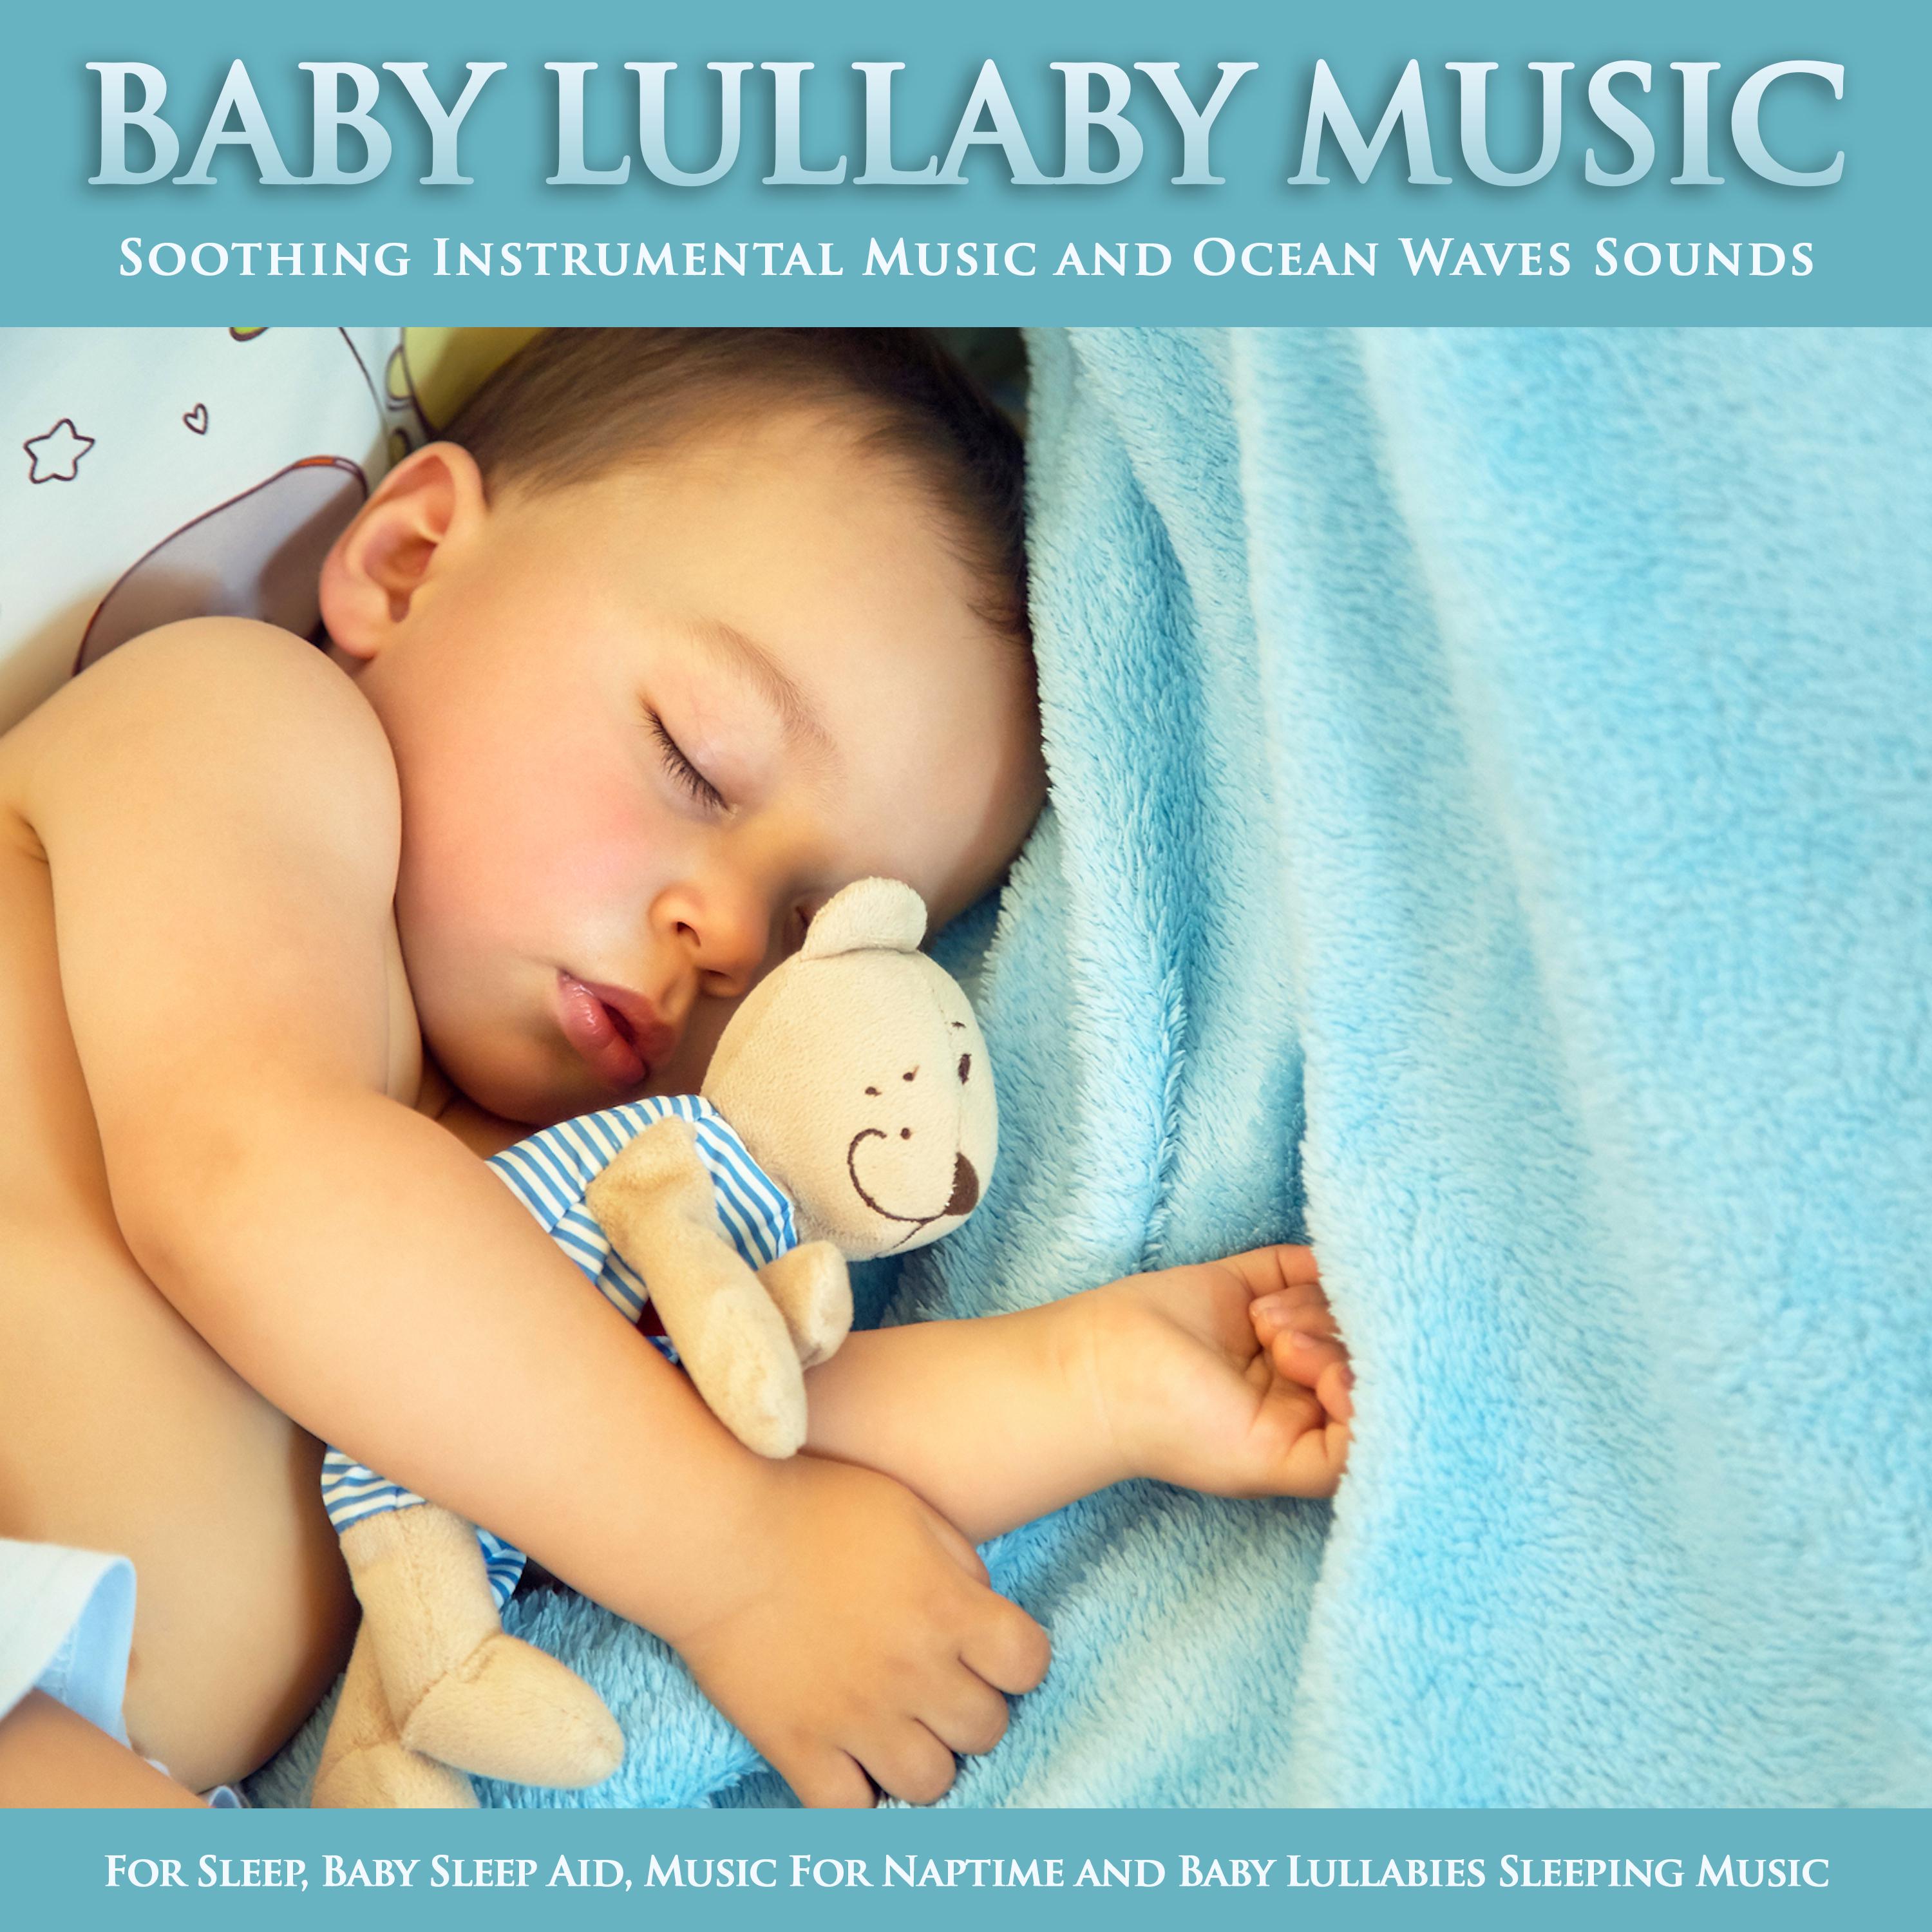 Baby Lullaby and Sounds of the Ocean